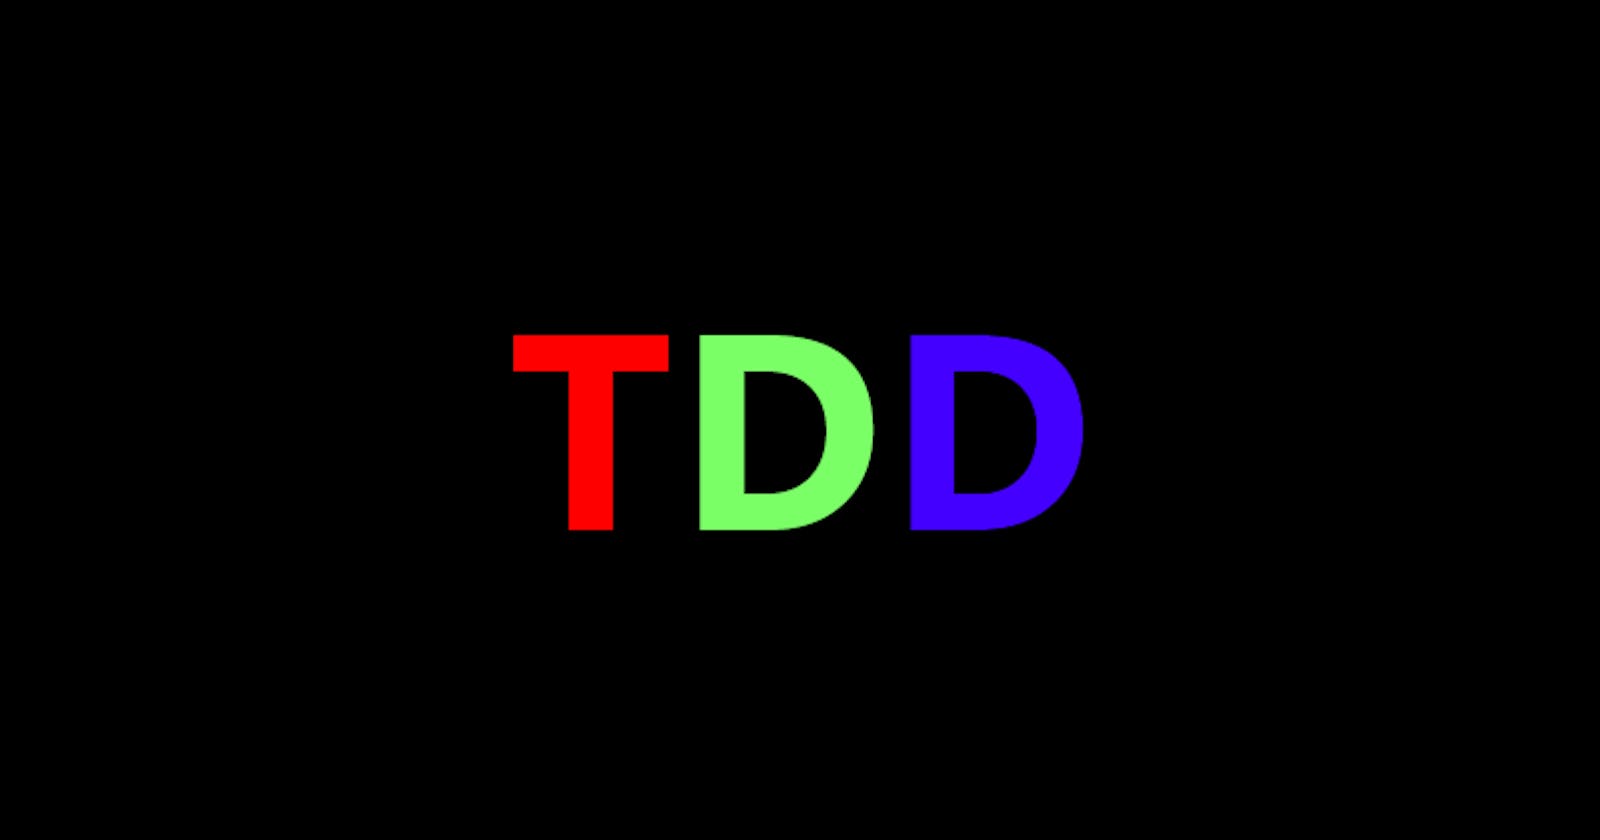 What is TDD and why should you care?